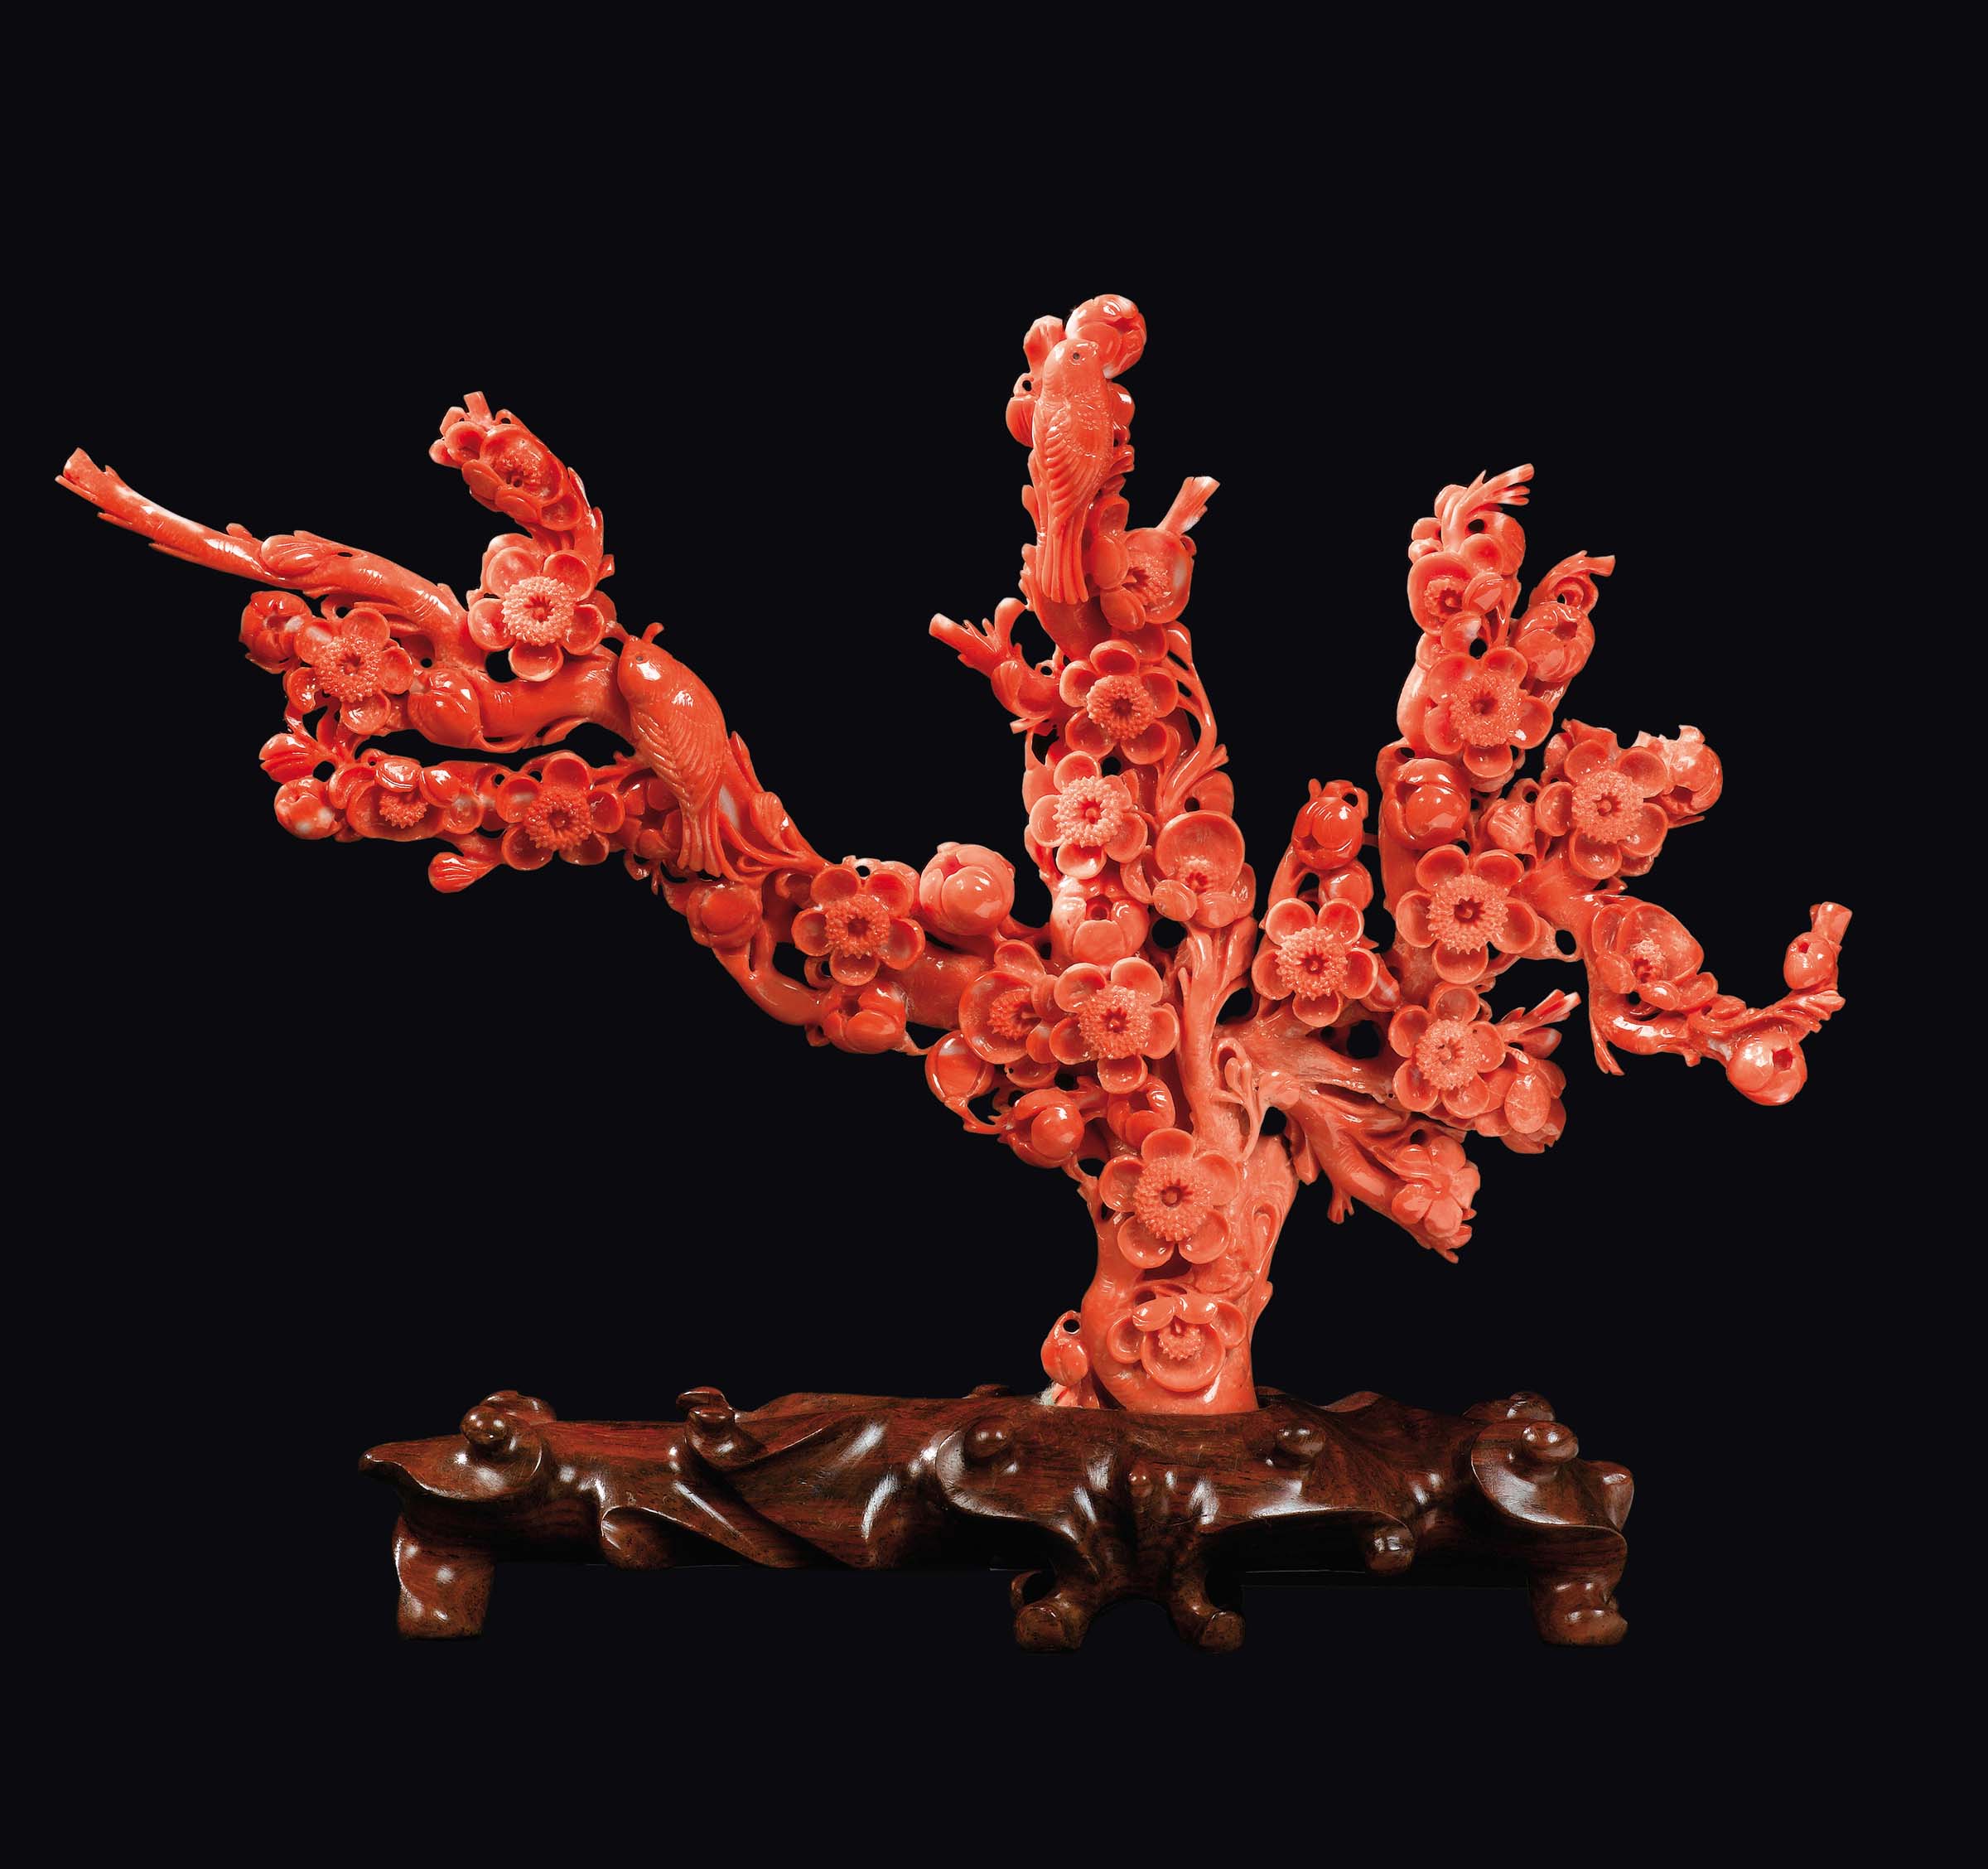 A carved coral branch with flowers and birds, China, early 20th century gr. 350 lordi, cm 15,5x24,